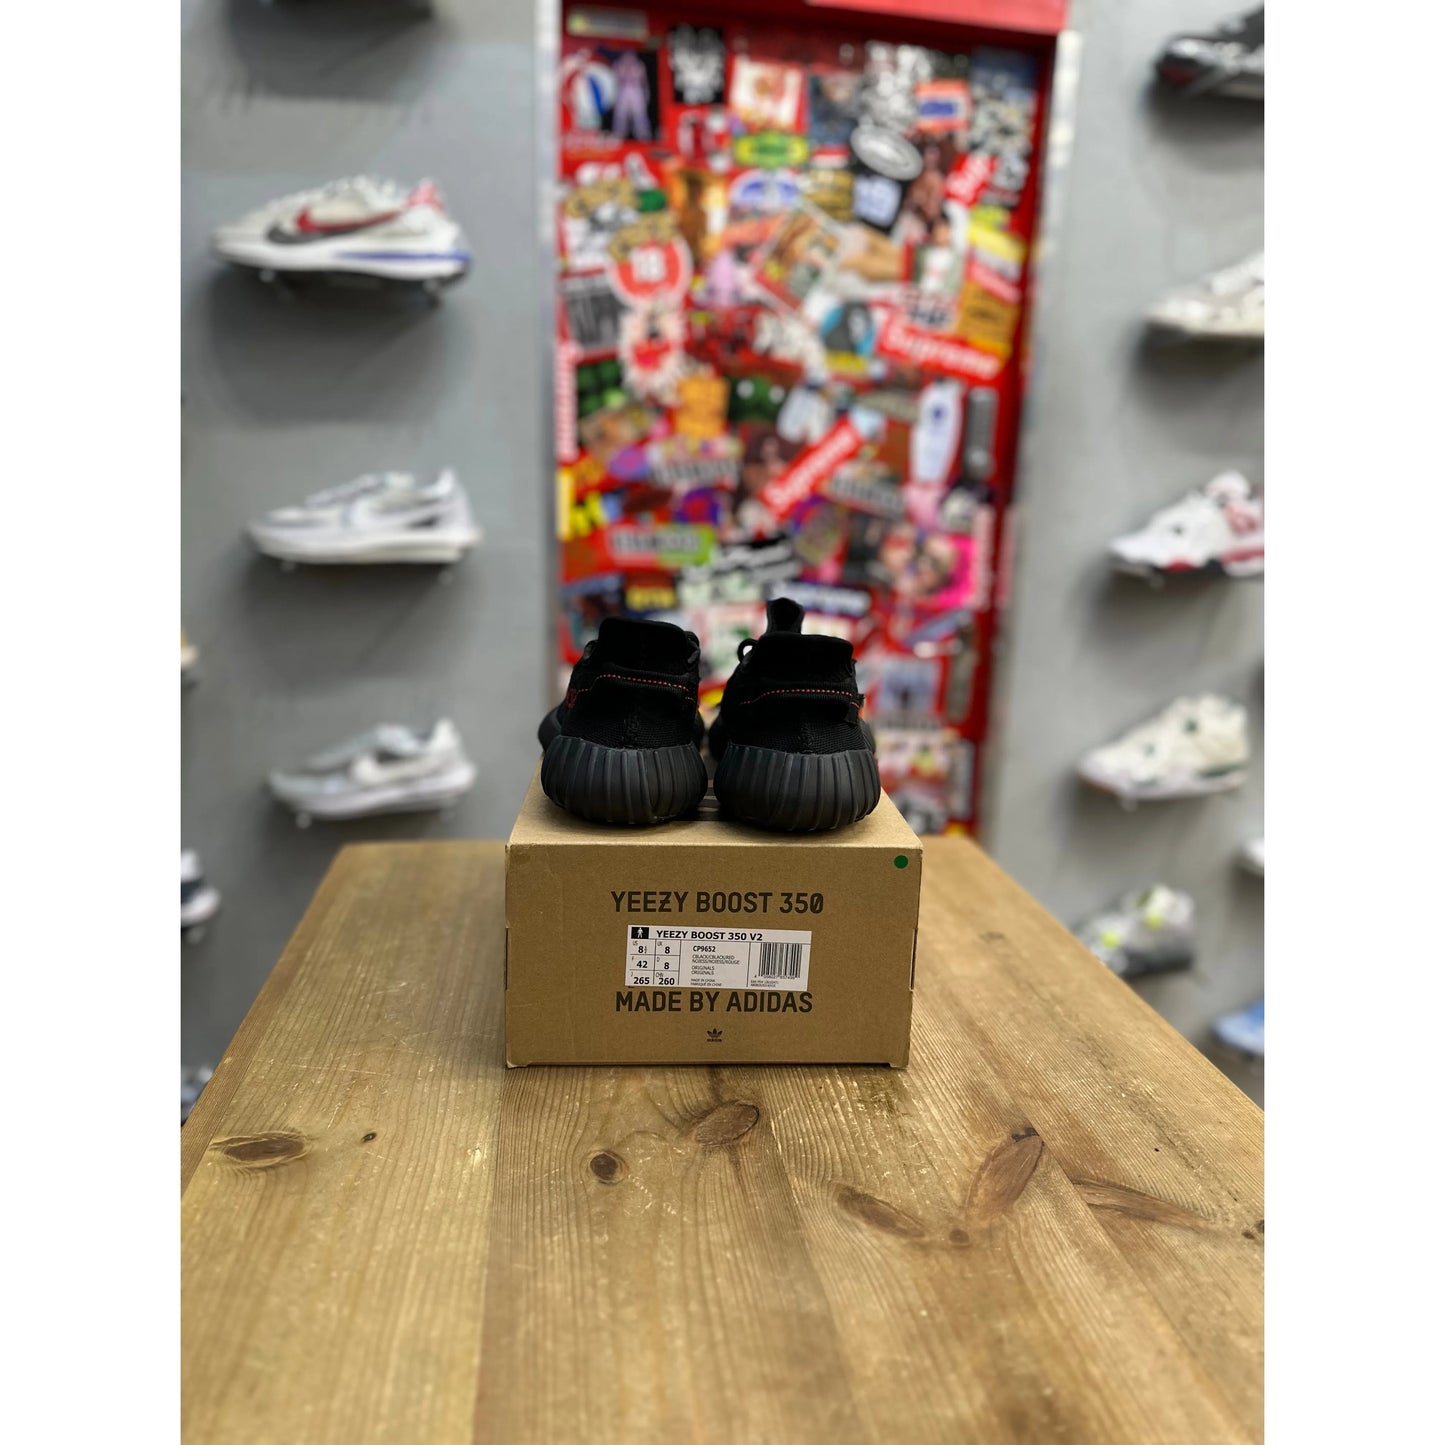 Adidas Yeezy Boost 350 V2 Black Red UK 8 from Yeezy